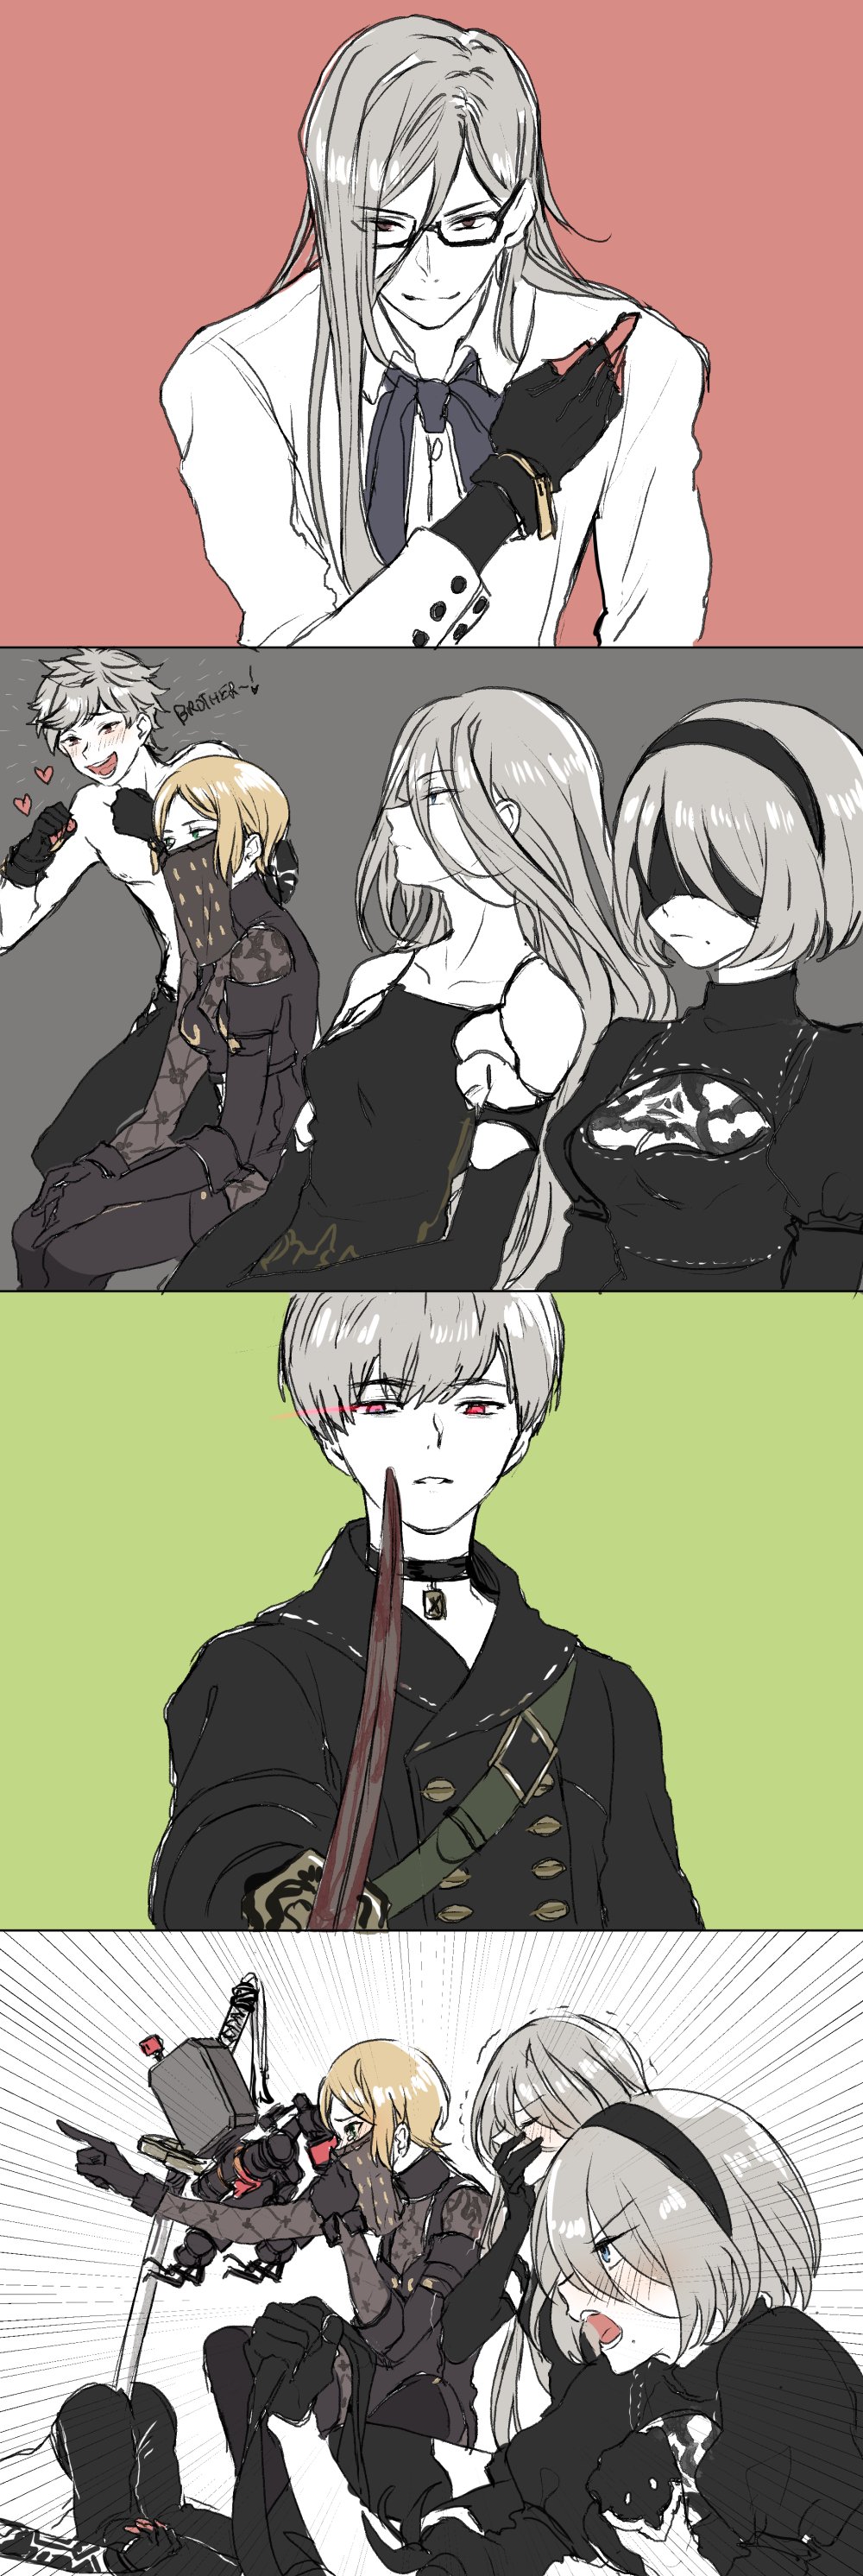 2boys 3girls 4koma absurdres adam_(nier_automata) adam_hughes anal_beads ass bangs blindfold blindfold_removed blonde_hair blue_eyes blush bowing breasts choker cleavage_cutout closed_eyes comic commentary covering_mouth daenarys dress elbow_gloves english eve_(nier_automata) gaijin_4koma glasses gloves grey_hair hair_between_eyes hairband heart highres holding holding_sword holding_weapon jacket long_hair medium_breasts multiple_boys multiple_girls nier_(series) nier_automata open_mouth operator_21o operator_6o pants parted_bangs pod_(nier_automata) pod_(pokemon) pointing red_eyes shirtless short_hair sitting smile spaghetti_strap sword tearing_up tears topless veil weapon yorha_no._2_type_b yorha_no._9_type_s yorha_type_a_no._2